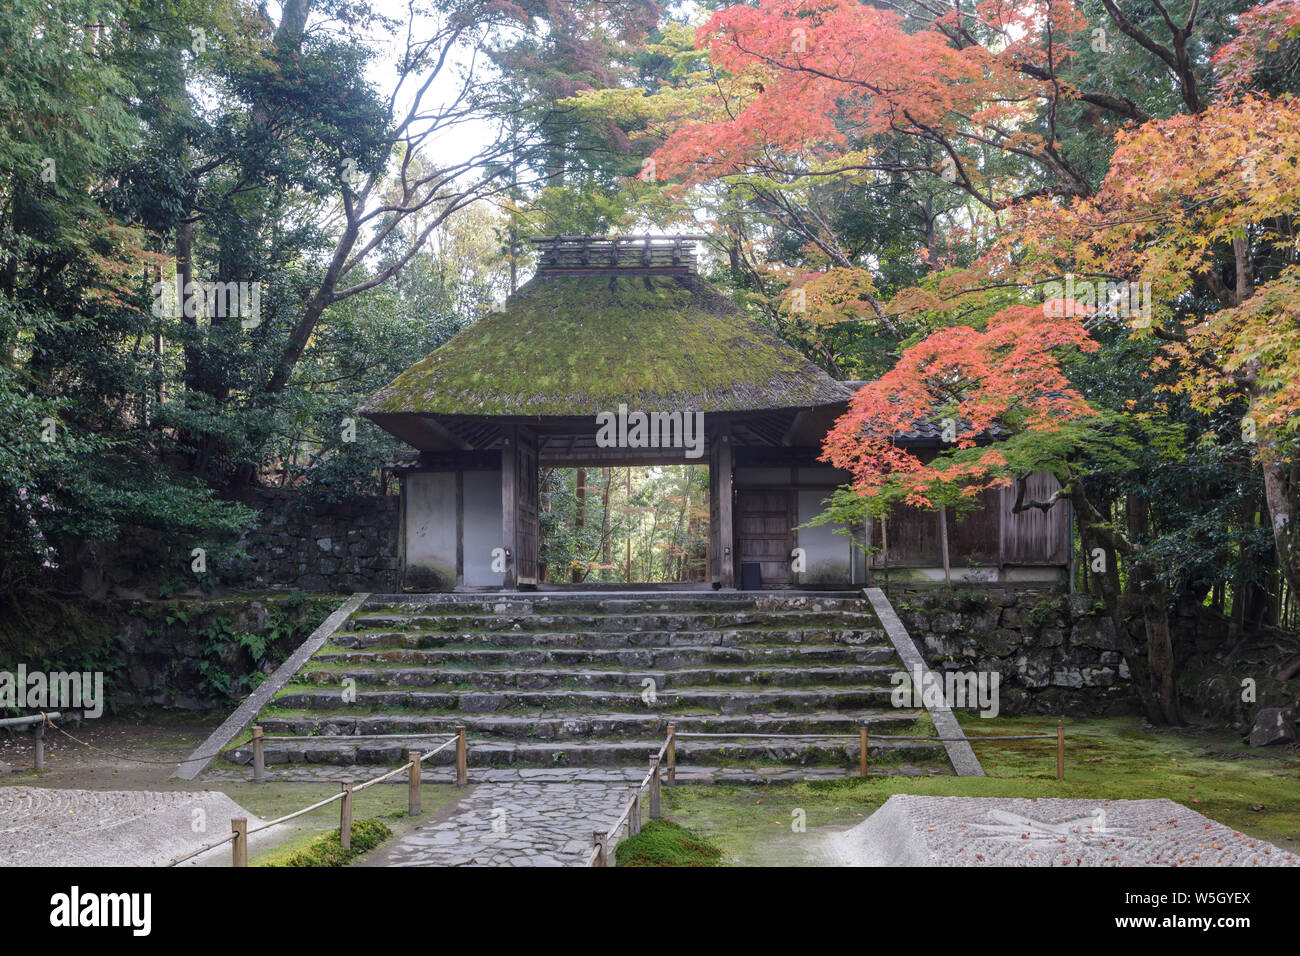 Autumn color in Honen-in temple, a Buddhist temple located on the Philosopher's Walk, Kyoto, Japan, Asia Stock Photo